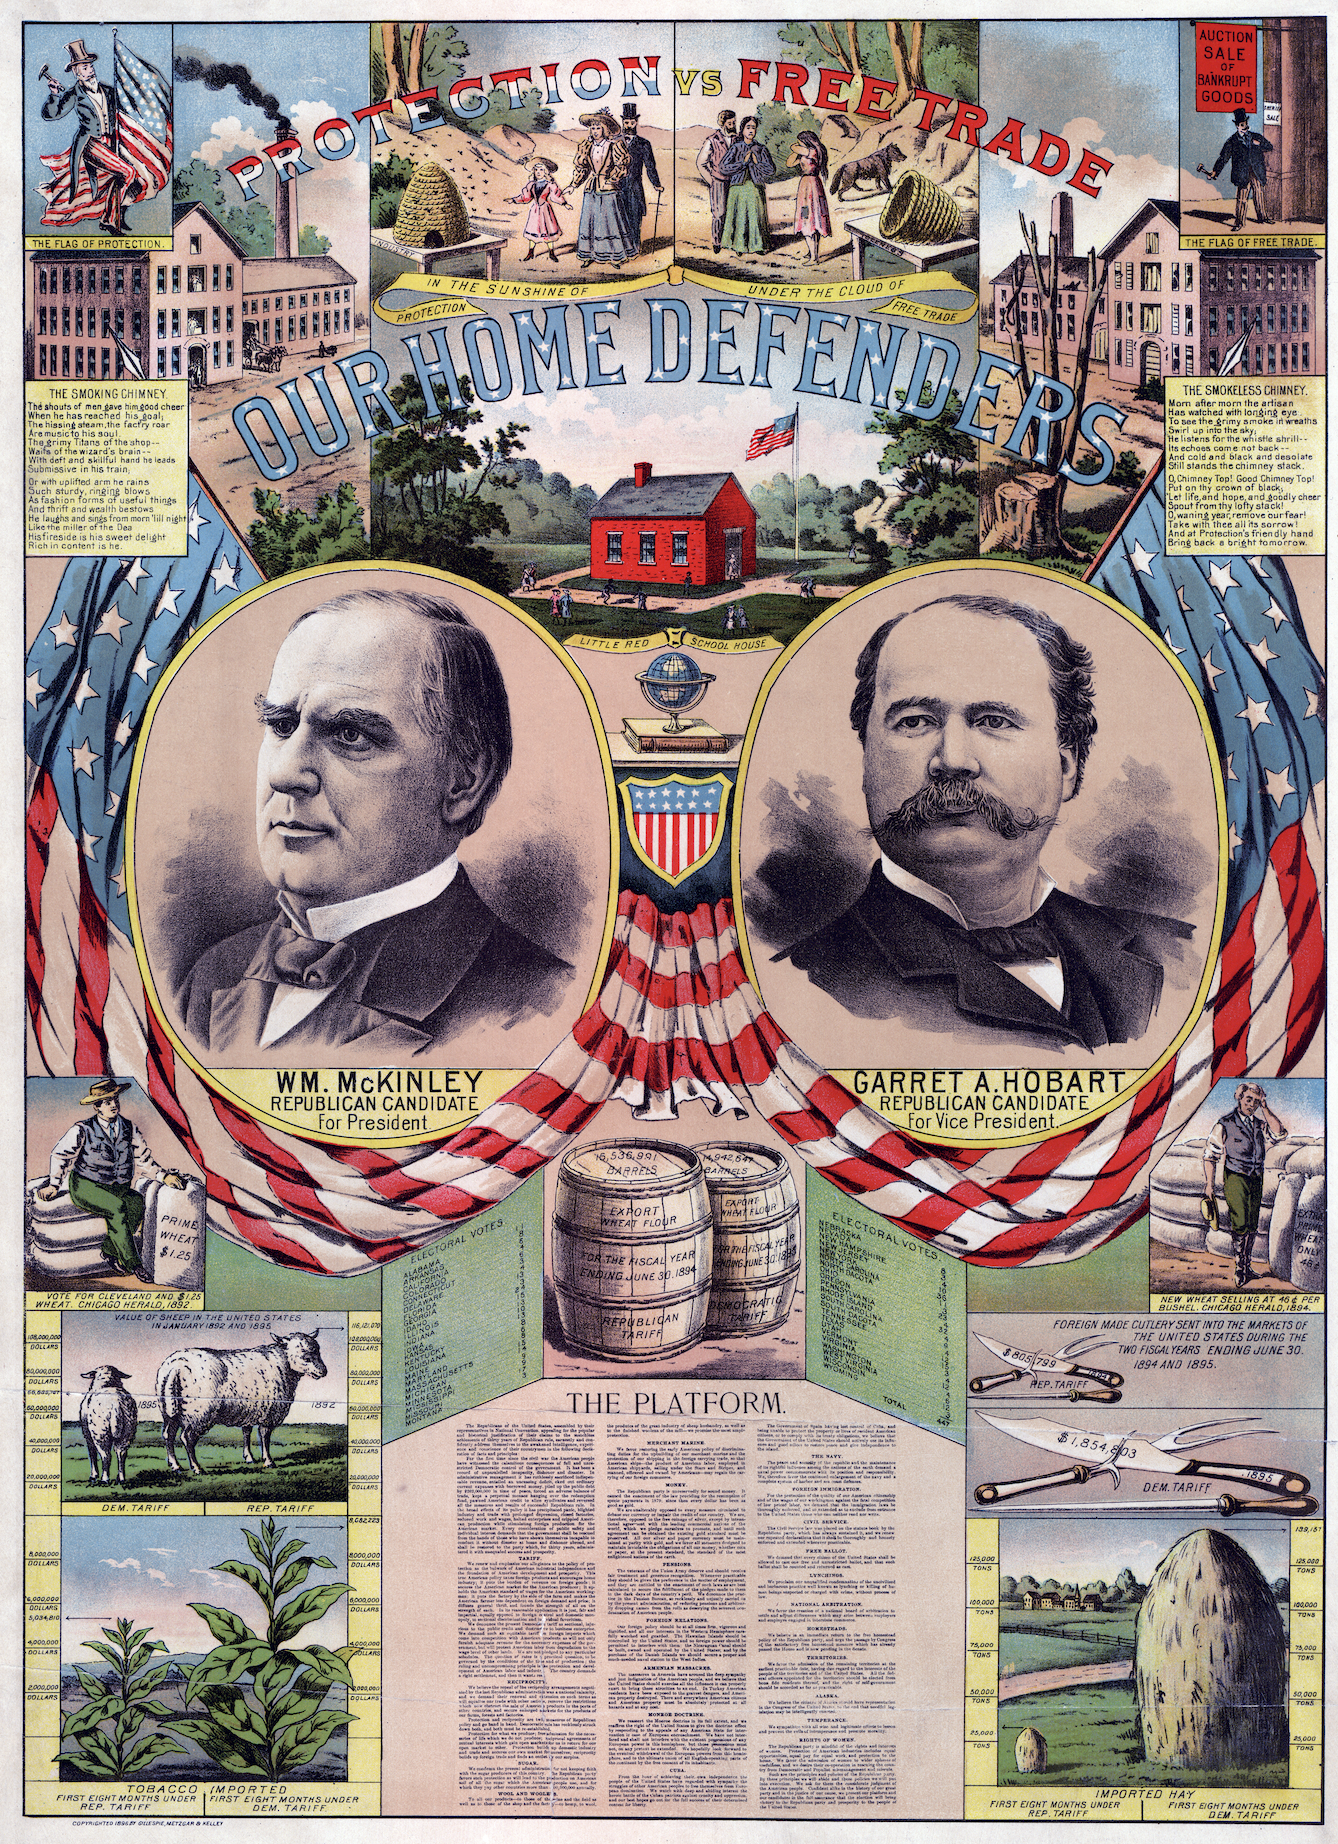 etched portraits of two men surrounded by an american flag bunting. lots of small print below and vignettes of their accomplishments